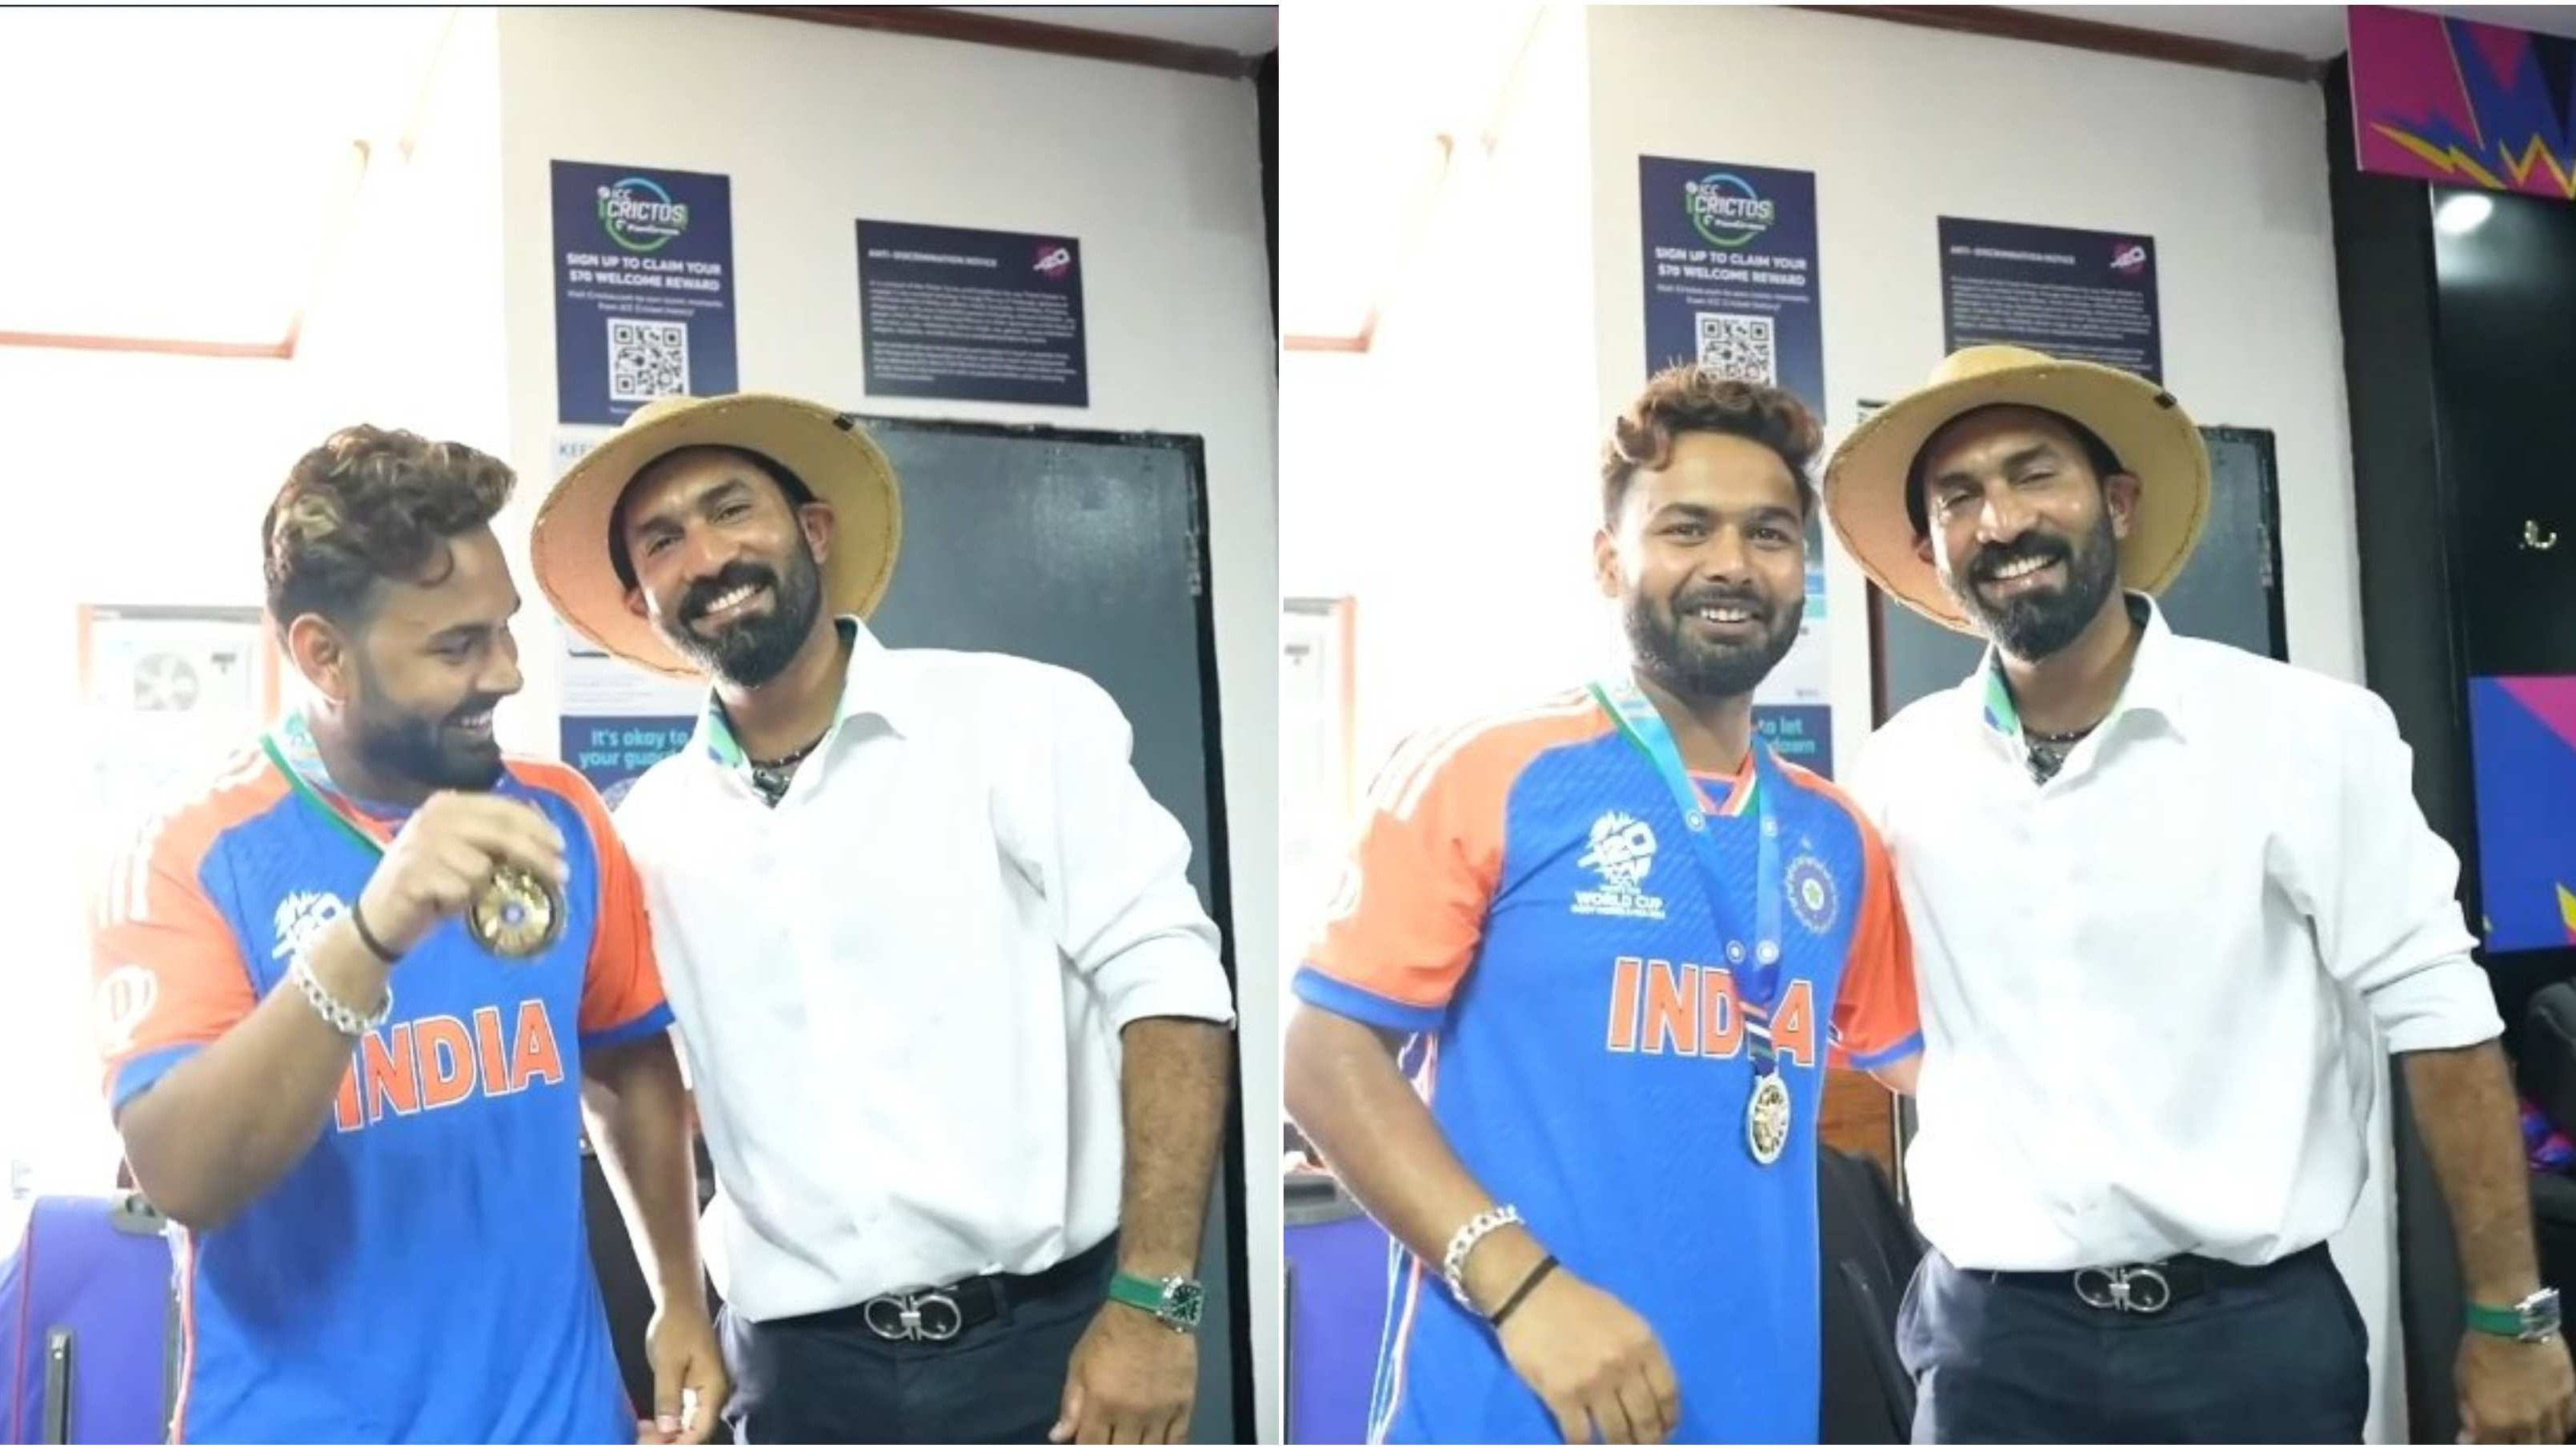 WATCH: Rishabh Pant receives ‘Best Fielder’ medal from Dinesh Karthik after India’s big win over England in semis